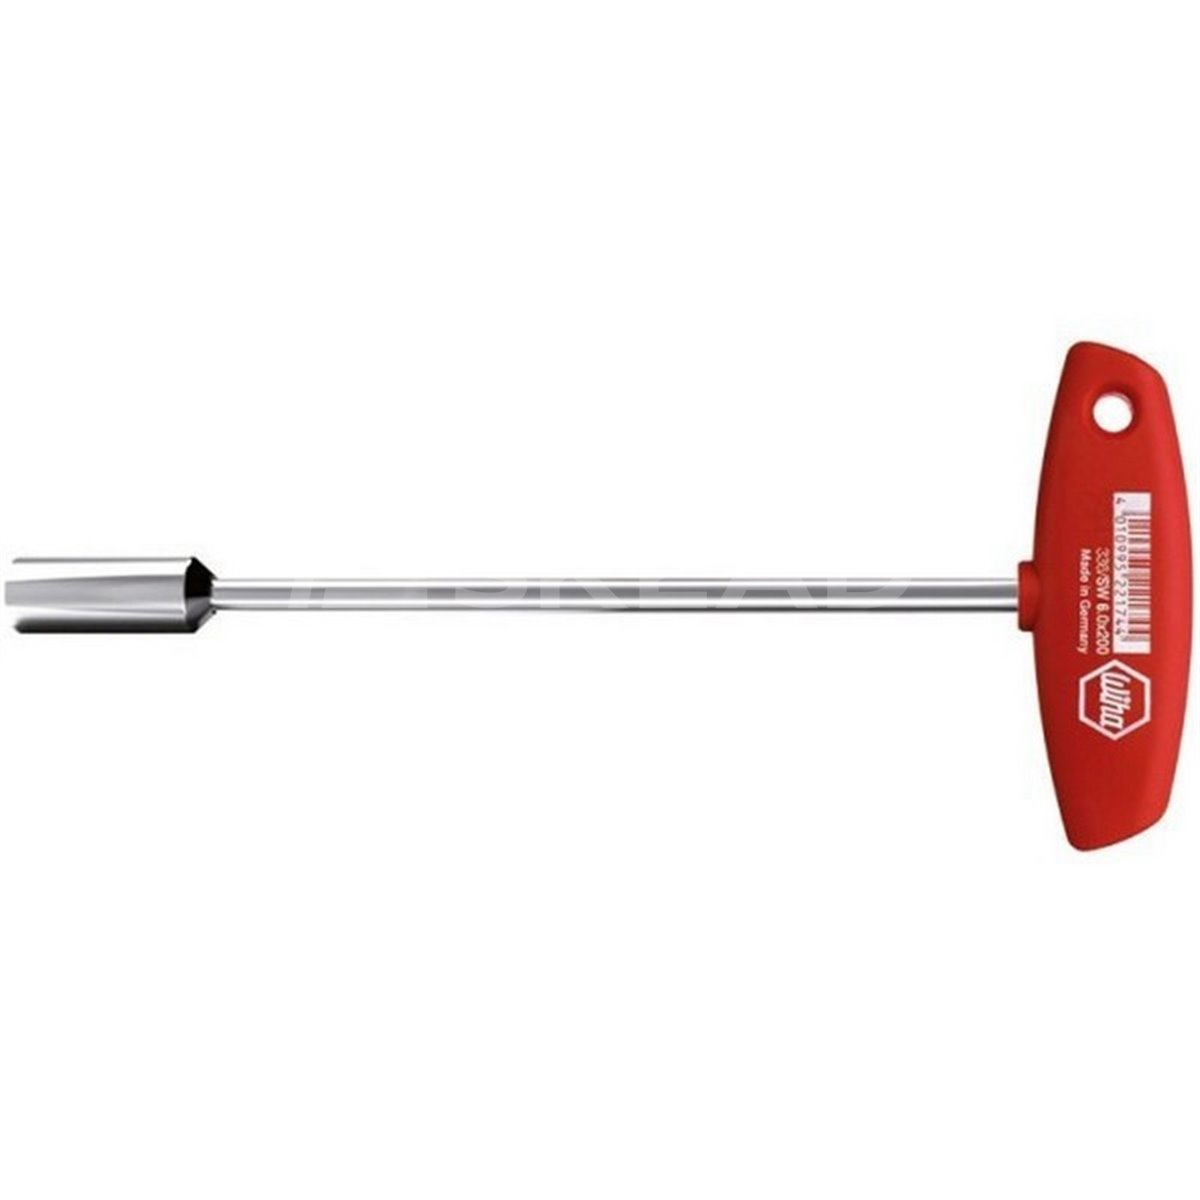 Socket wrench with T-handle. Classic 336 13 230mm Wiha 00989.